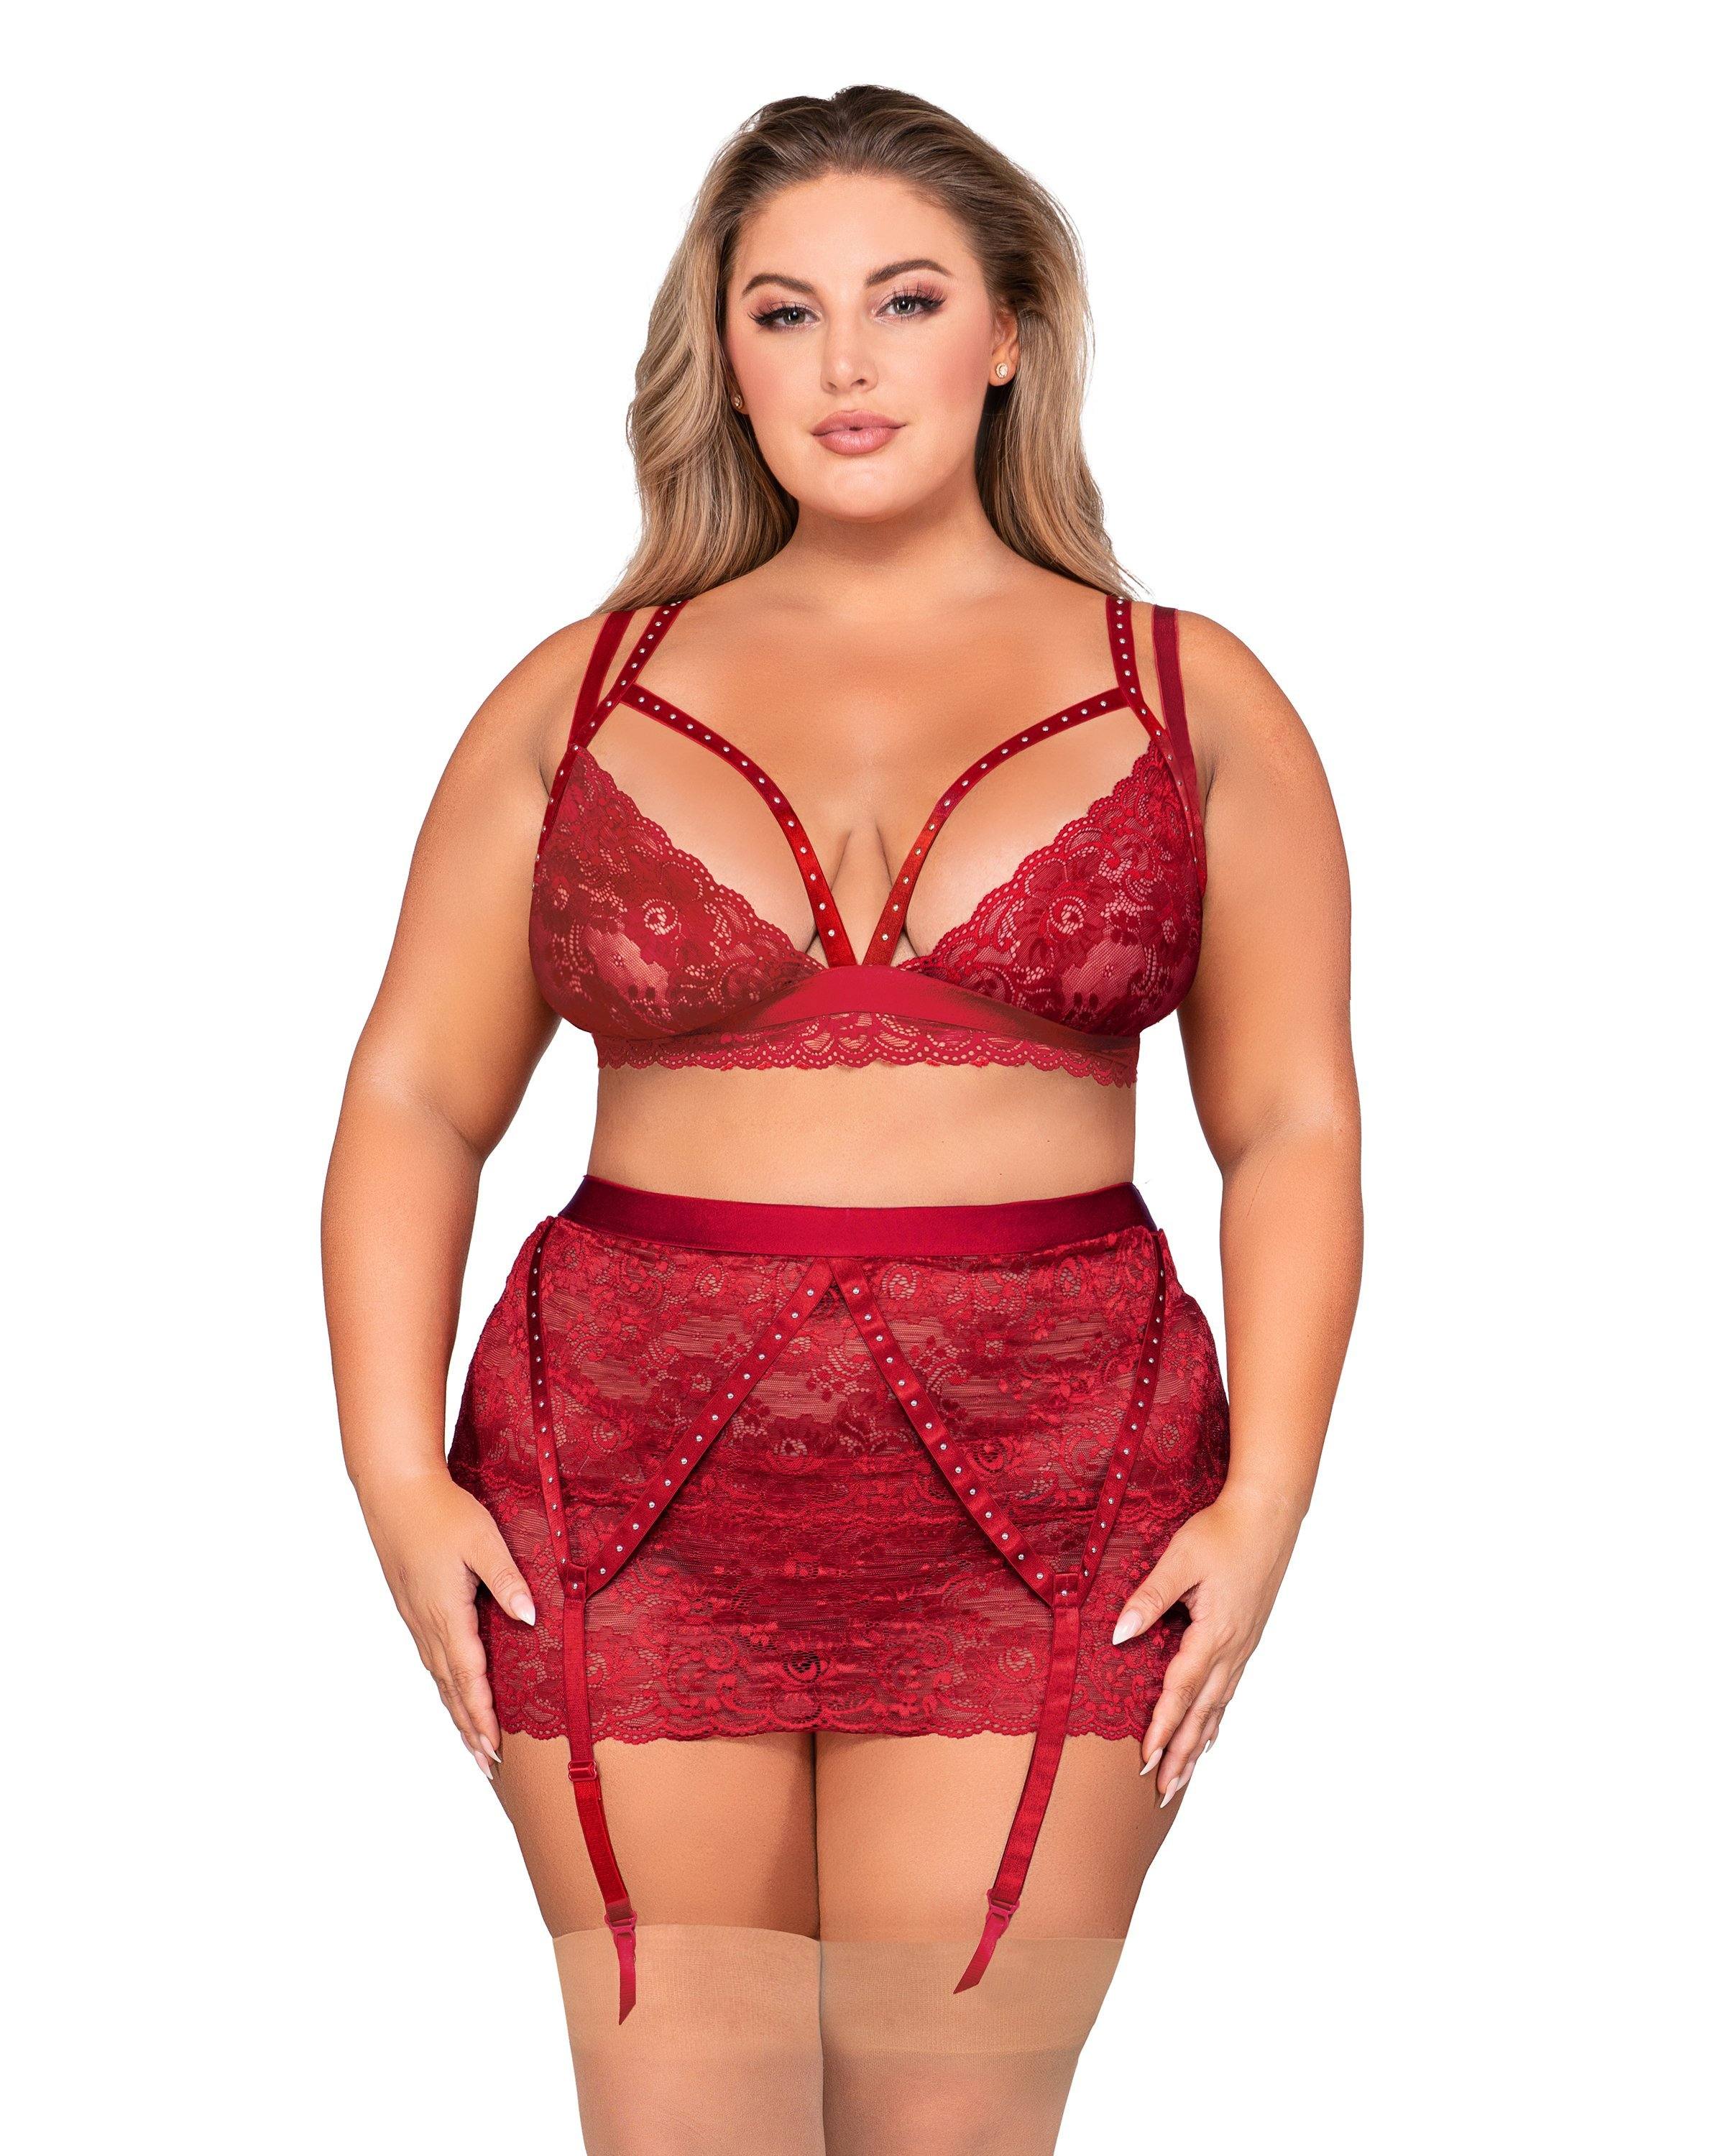 Plus Size Scalloped Lace Bralette, Garterskirt & G-String Set with Studded Strapping Dreamgirl International 